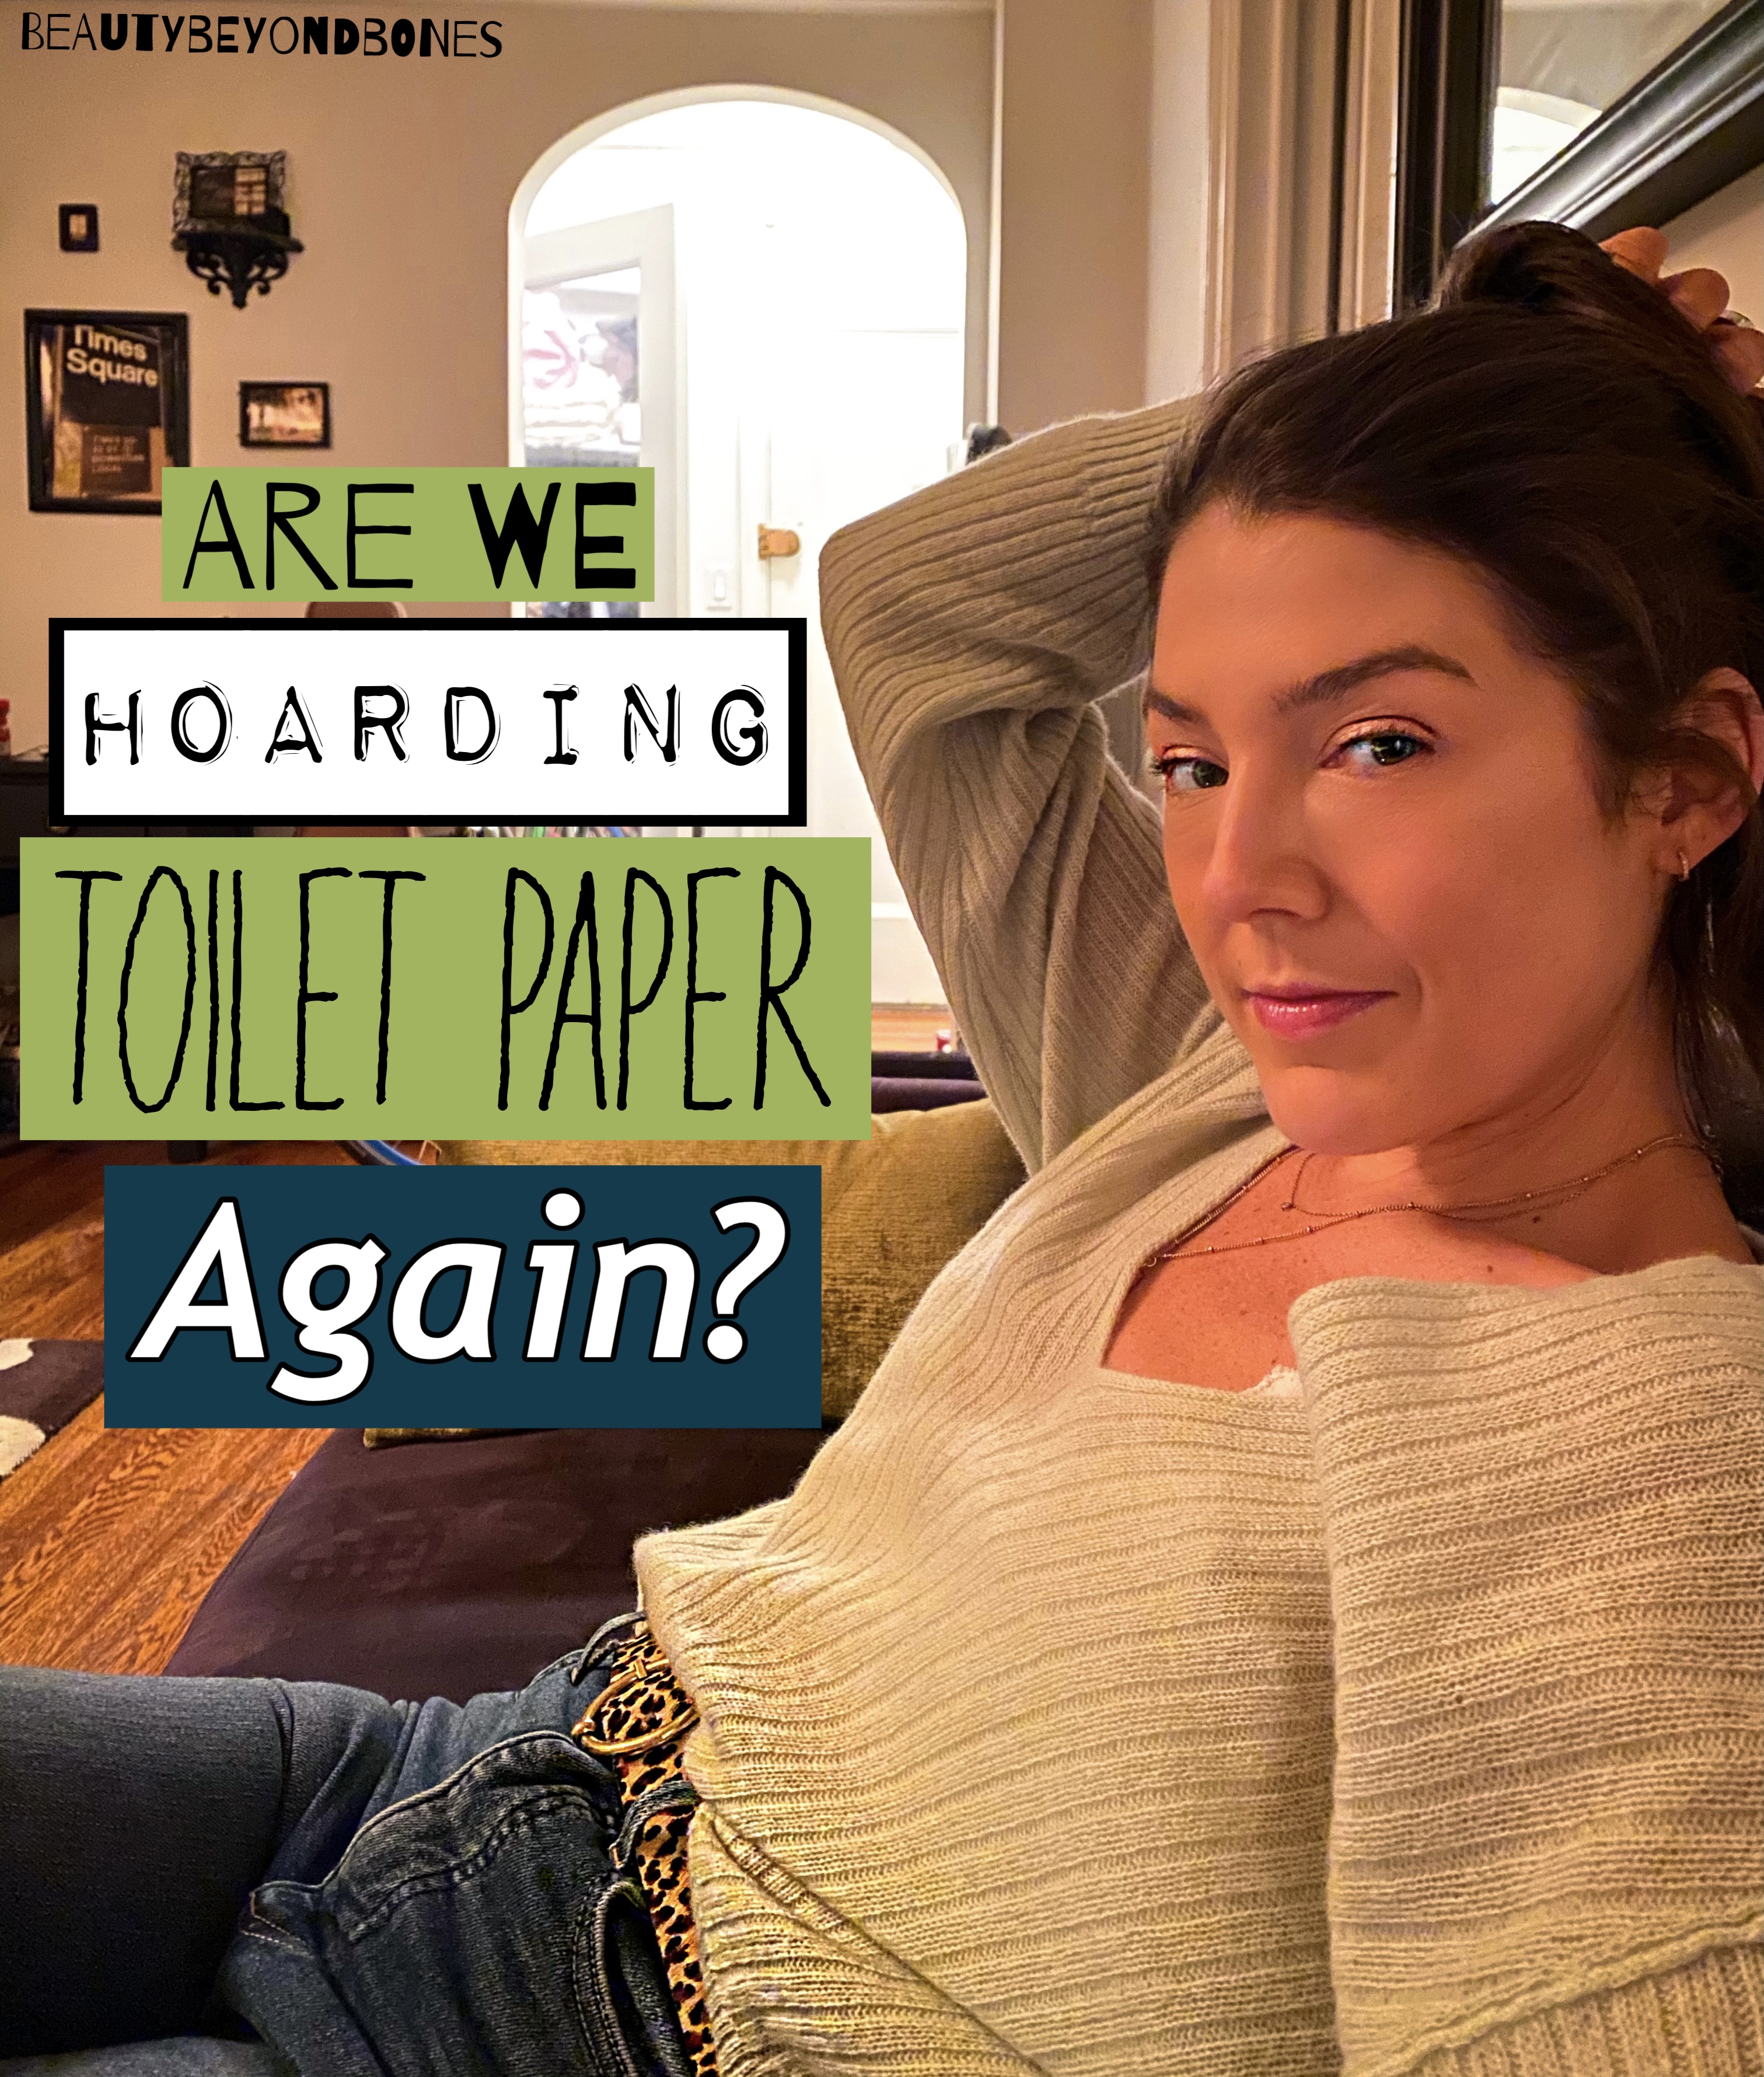 Are We Hoarding Toilet Paper Again?